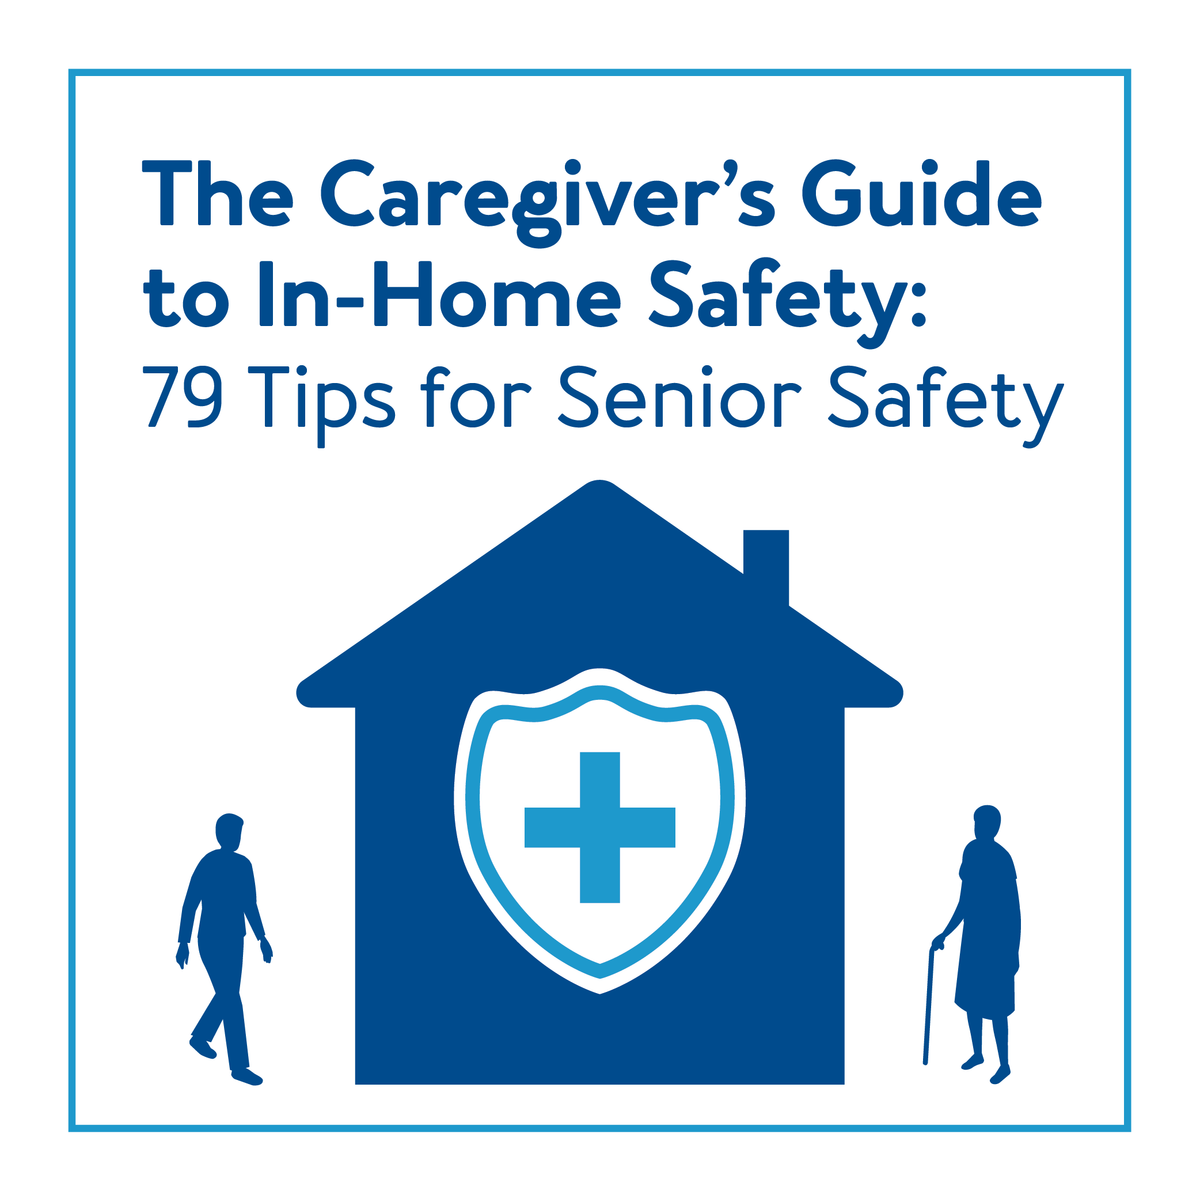 Home graphic with two outlines of people, text “The Caregiver’s Guide to In-Home Safety: 79 Tips for Senior Safety”